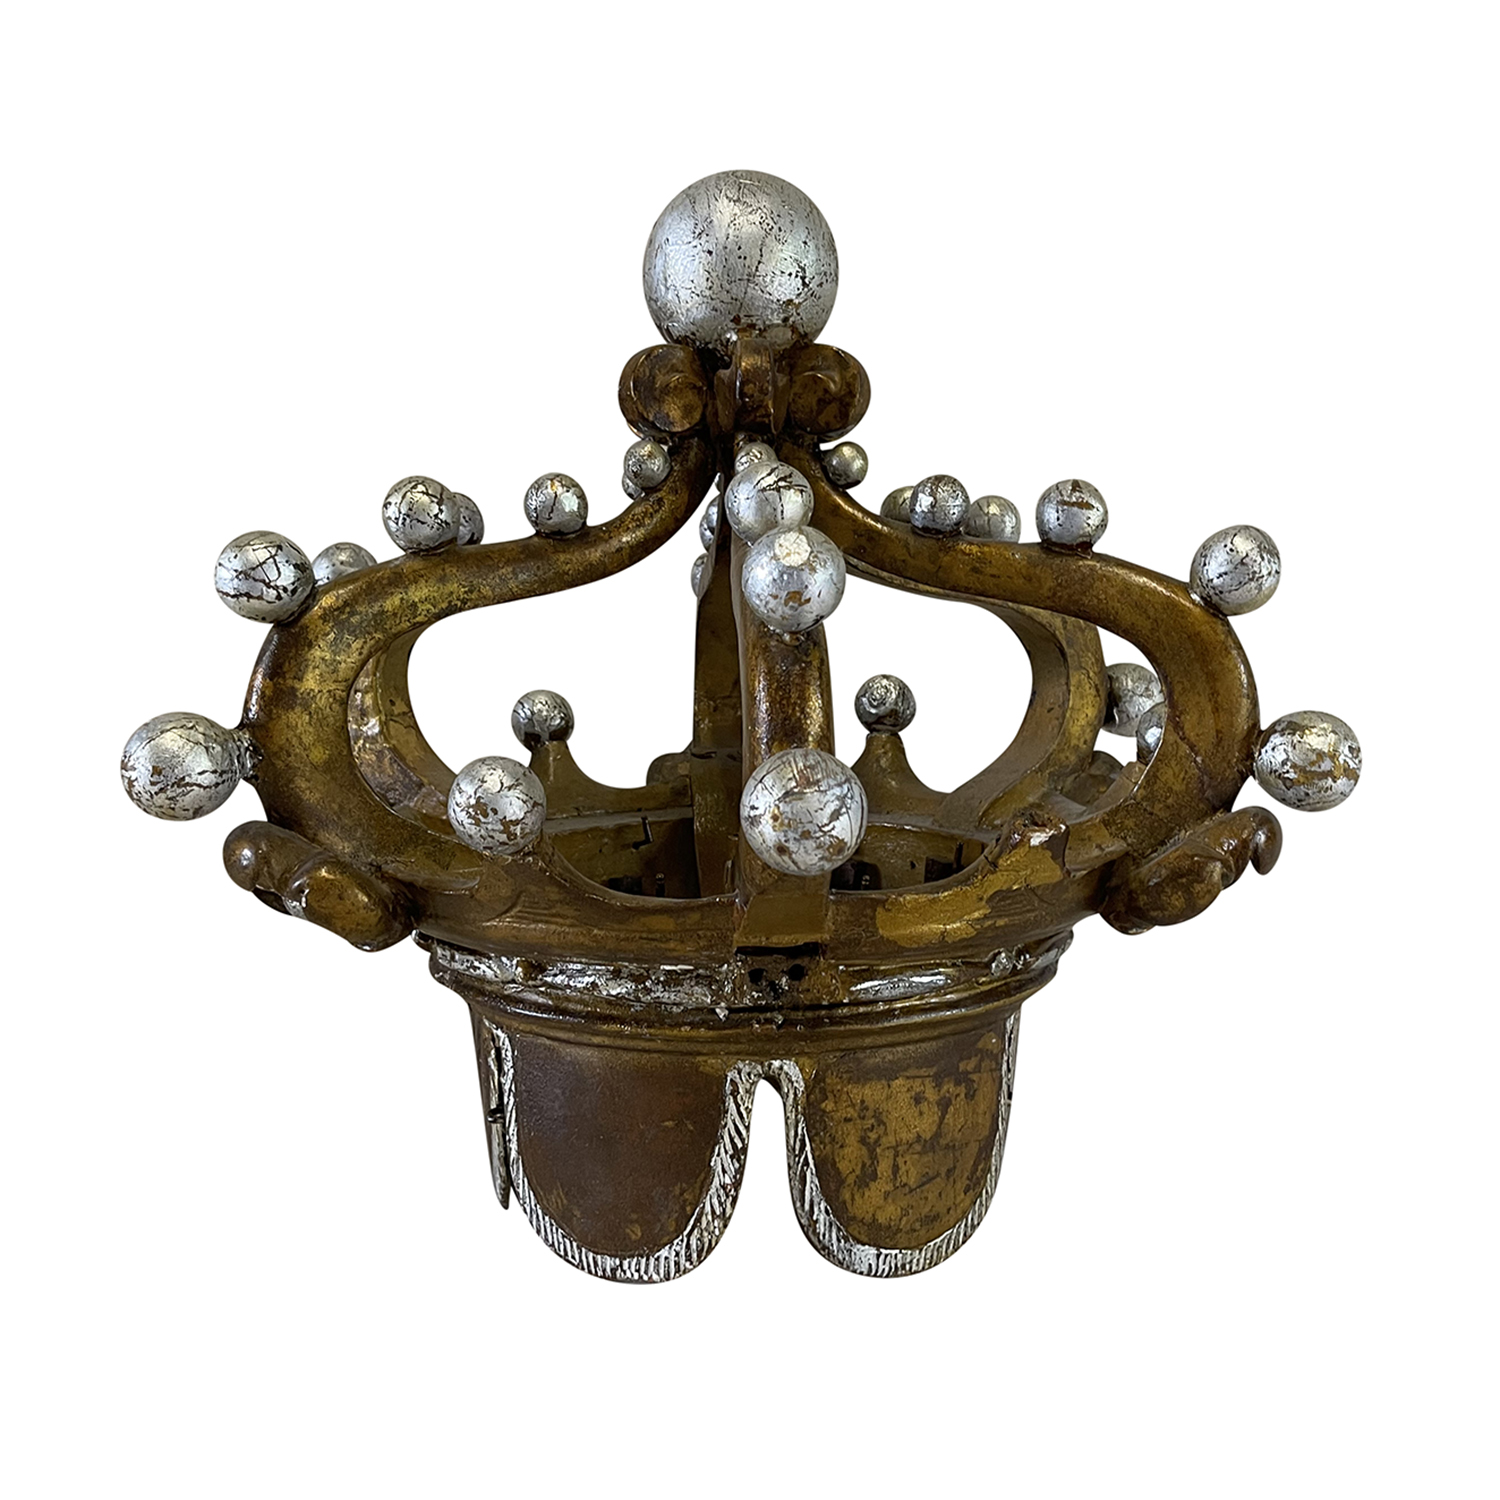 19th Century Italian Basswood Crown Ornament from Alto Adige – Antique Décor